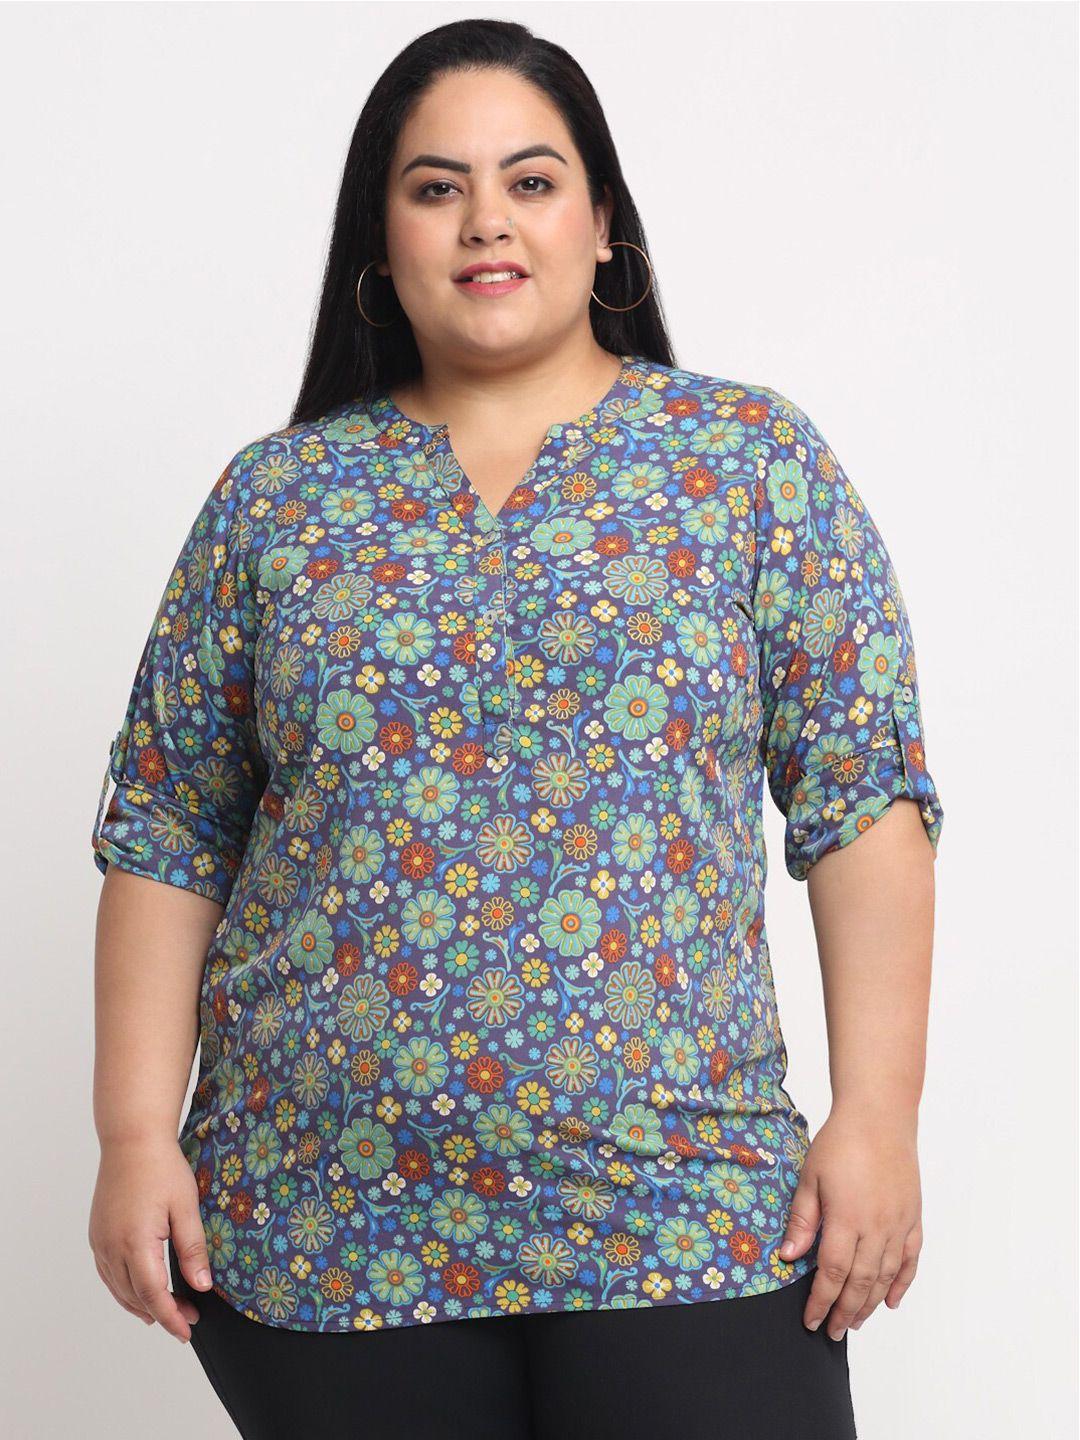 pluss women blue & brown floral print roll-up sleeves shirt style top